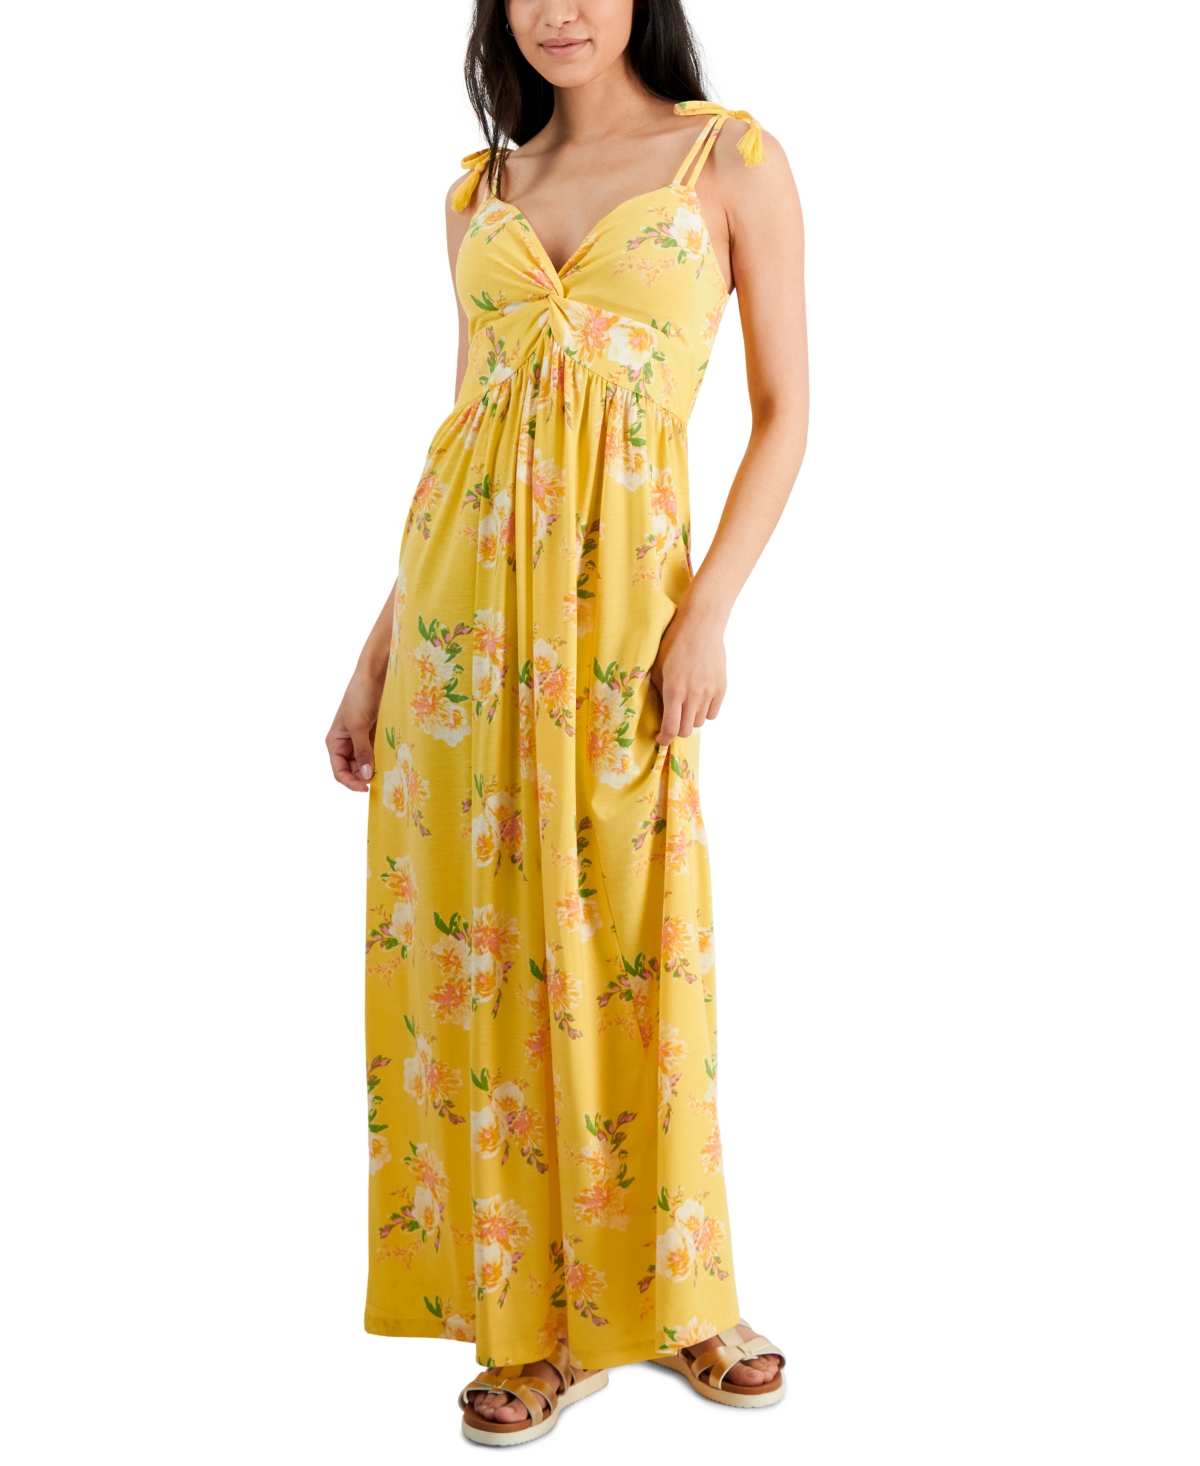 Jamie & Layla Petite Shoulder-tie Twist-front Maxi Dress In Yellow Green Small Floral